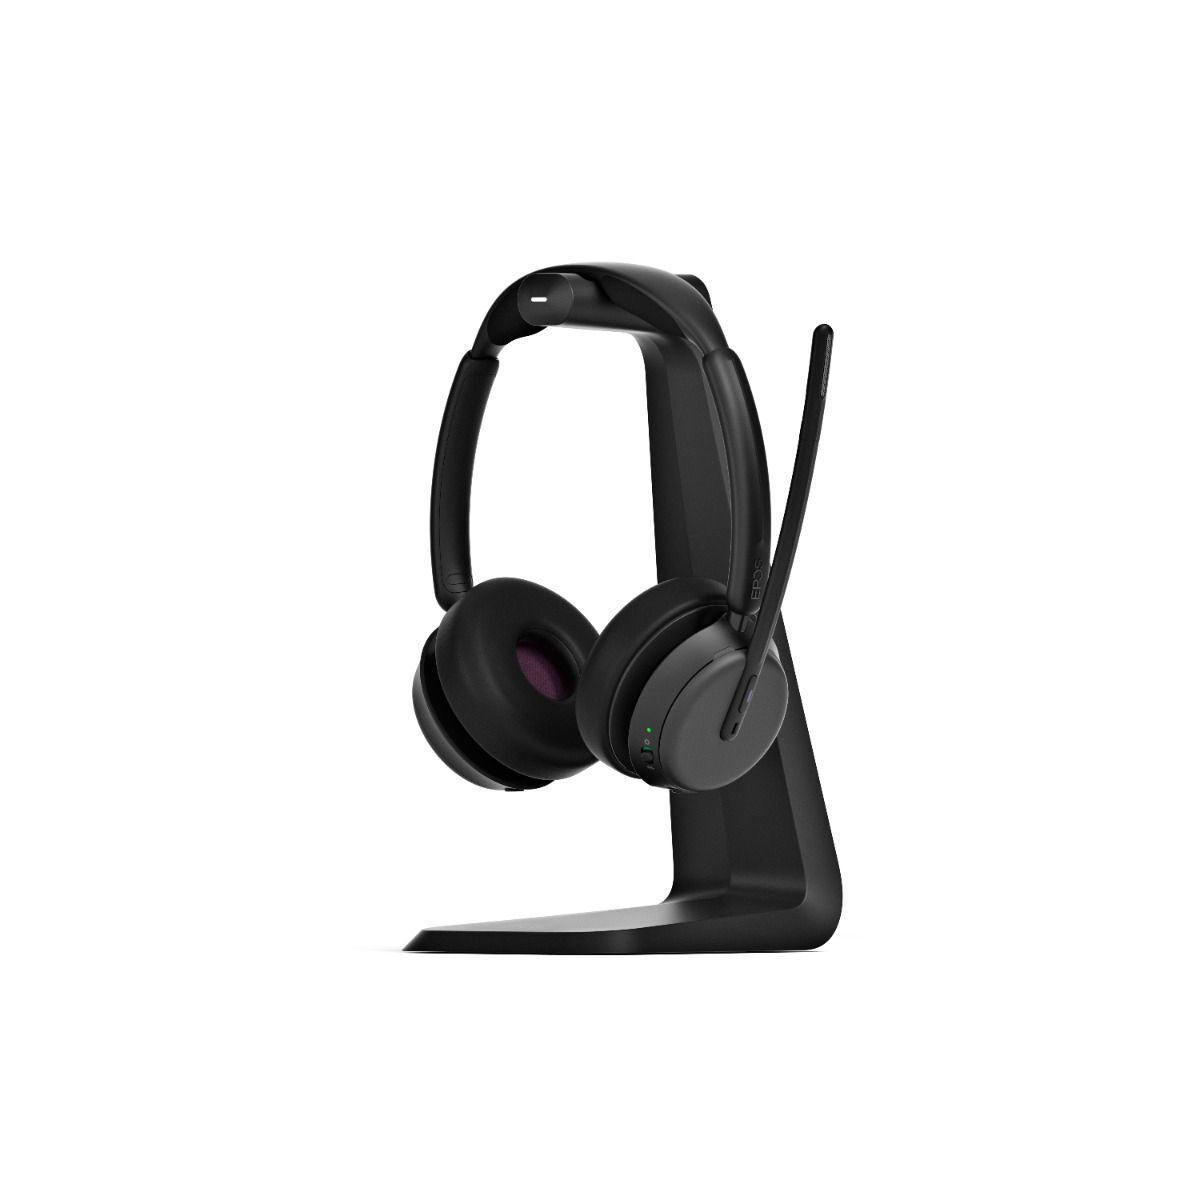 EPOS IMPACT 1061 ANC UC, Duo Bluetooth headset with ANC and Stand, USB-A